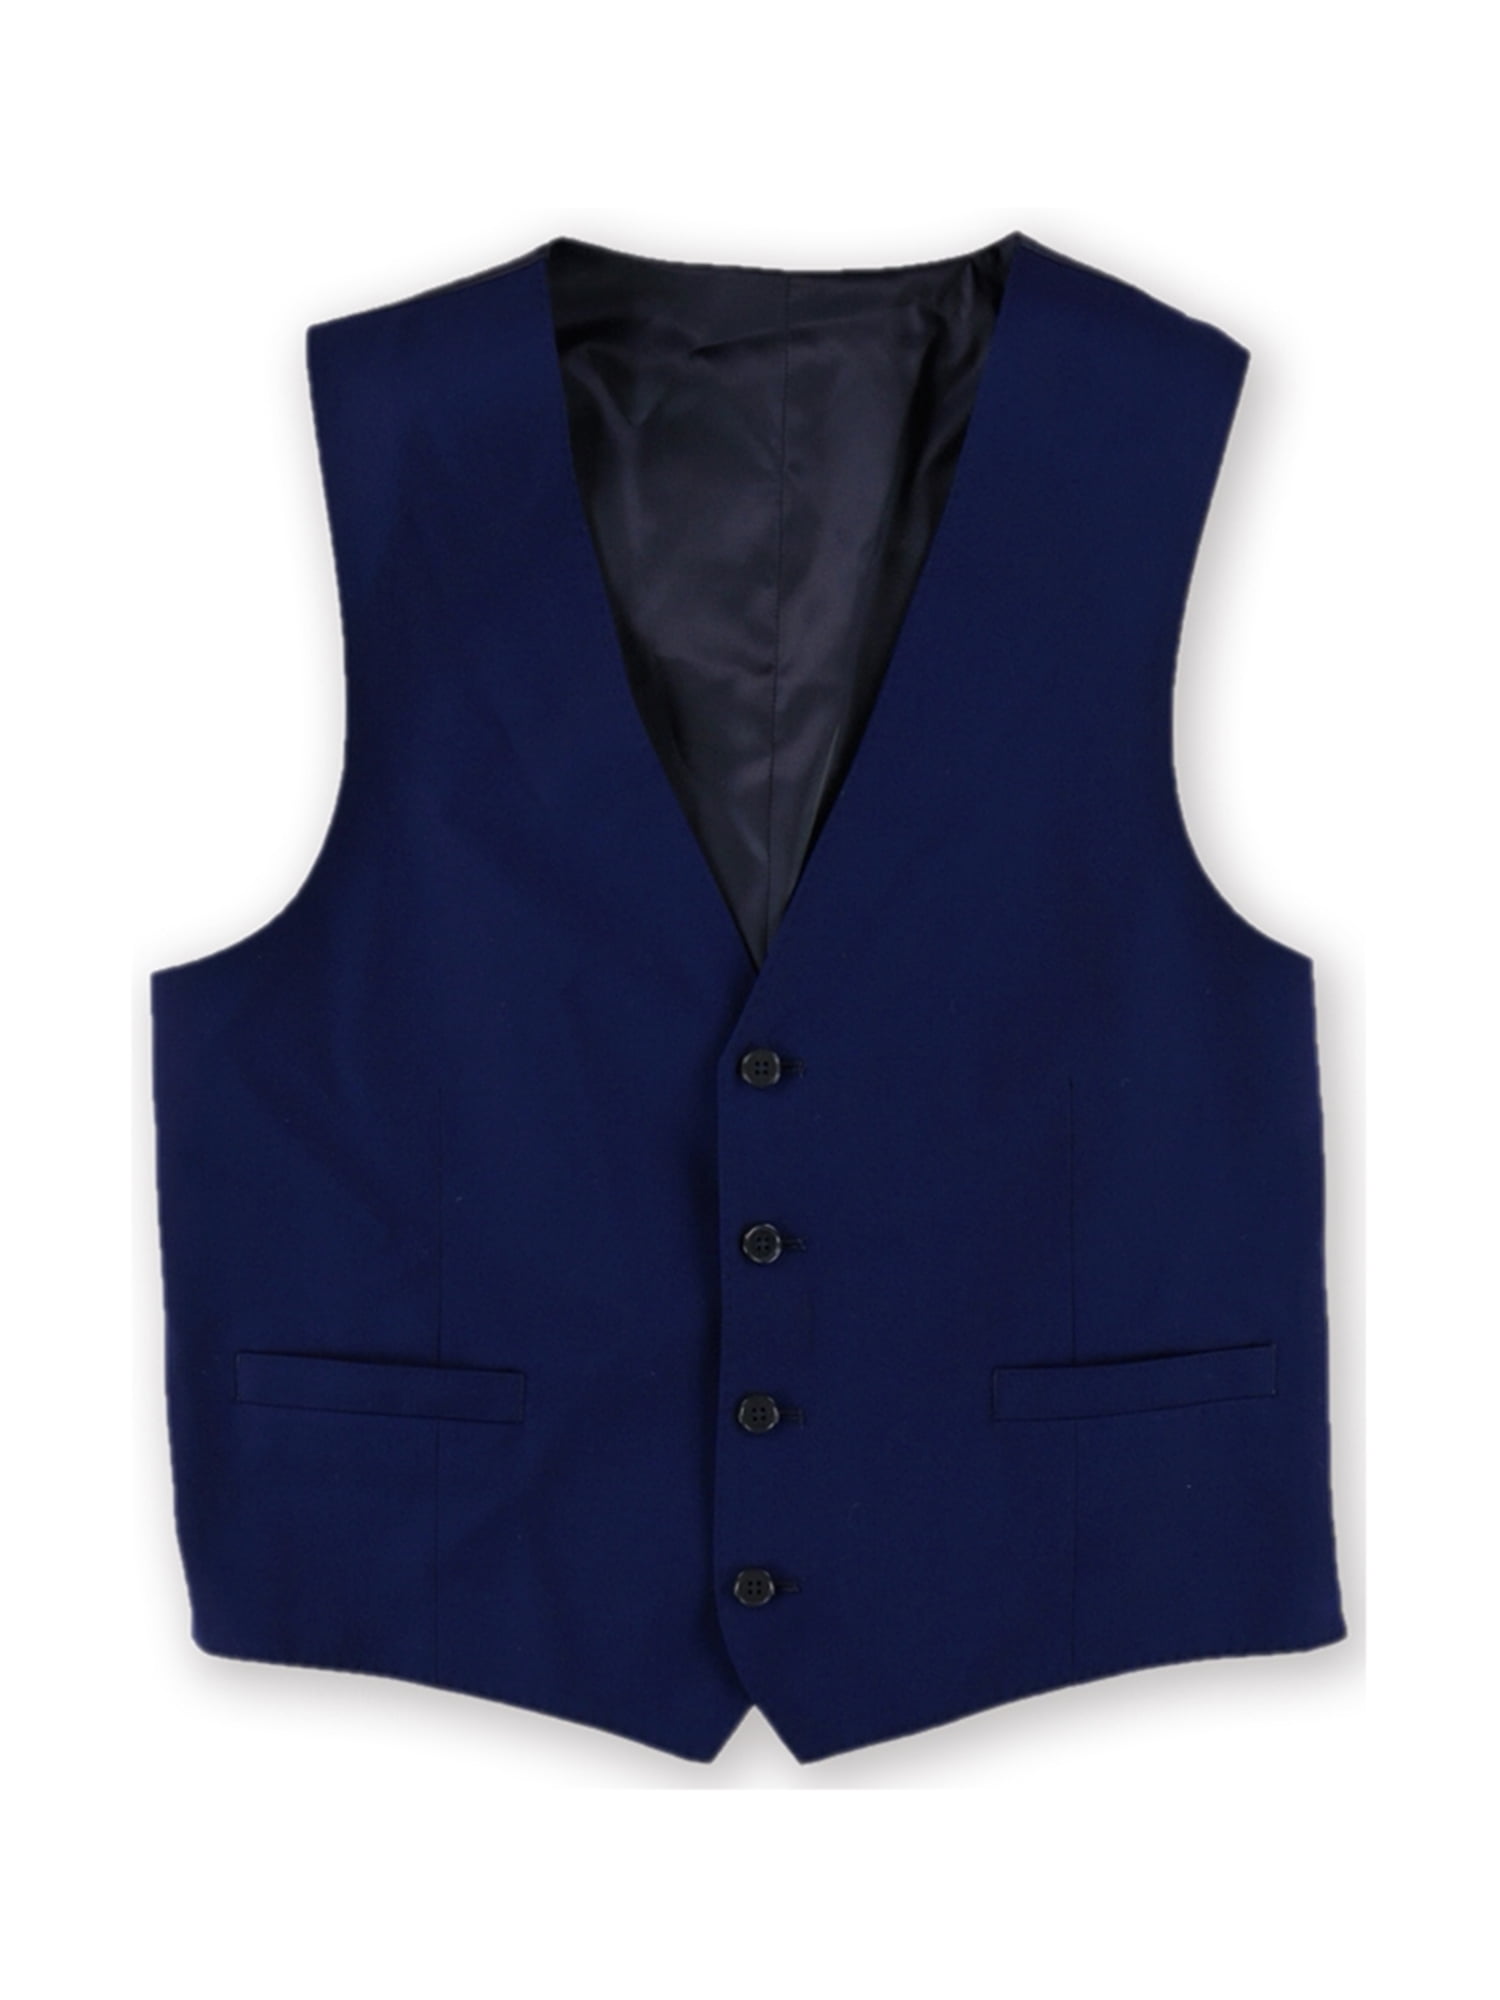 Tags Weekly Mens Professional Four Button Vest navy 40 | Walmart Canada